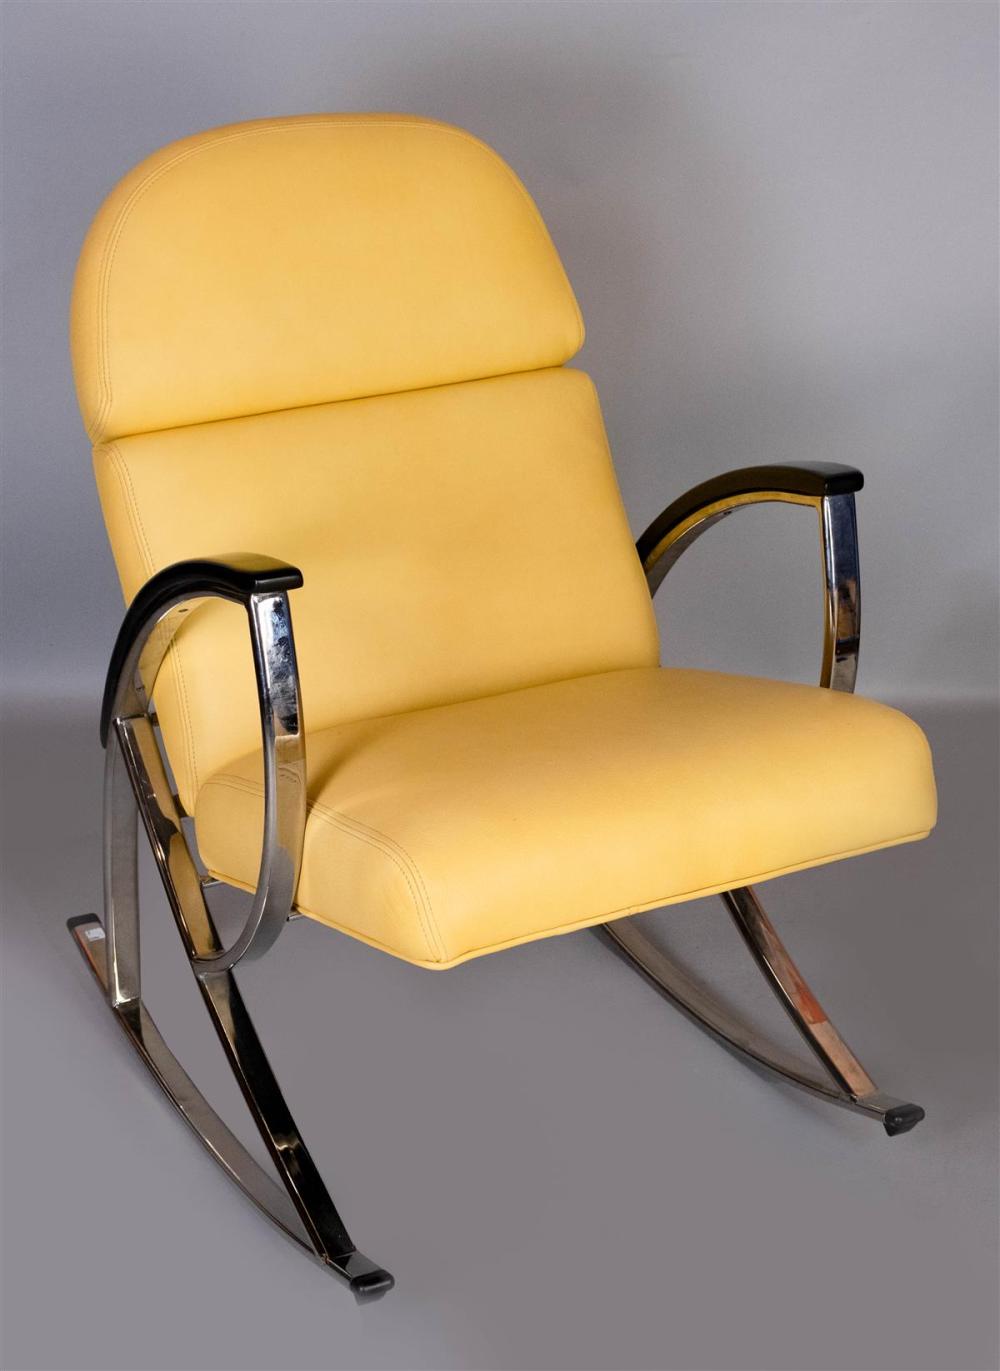 UNUSUAL MODERNIST YELLOW LEATHER 311e27